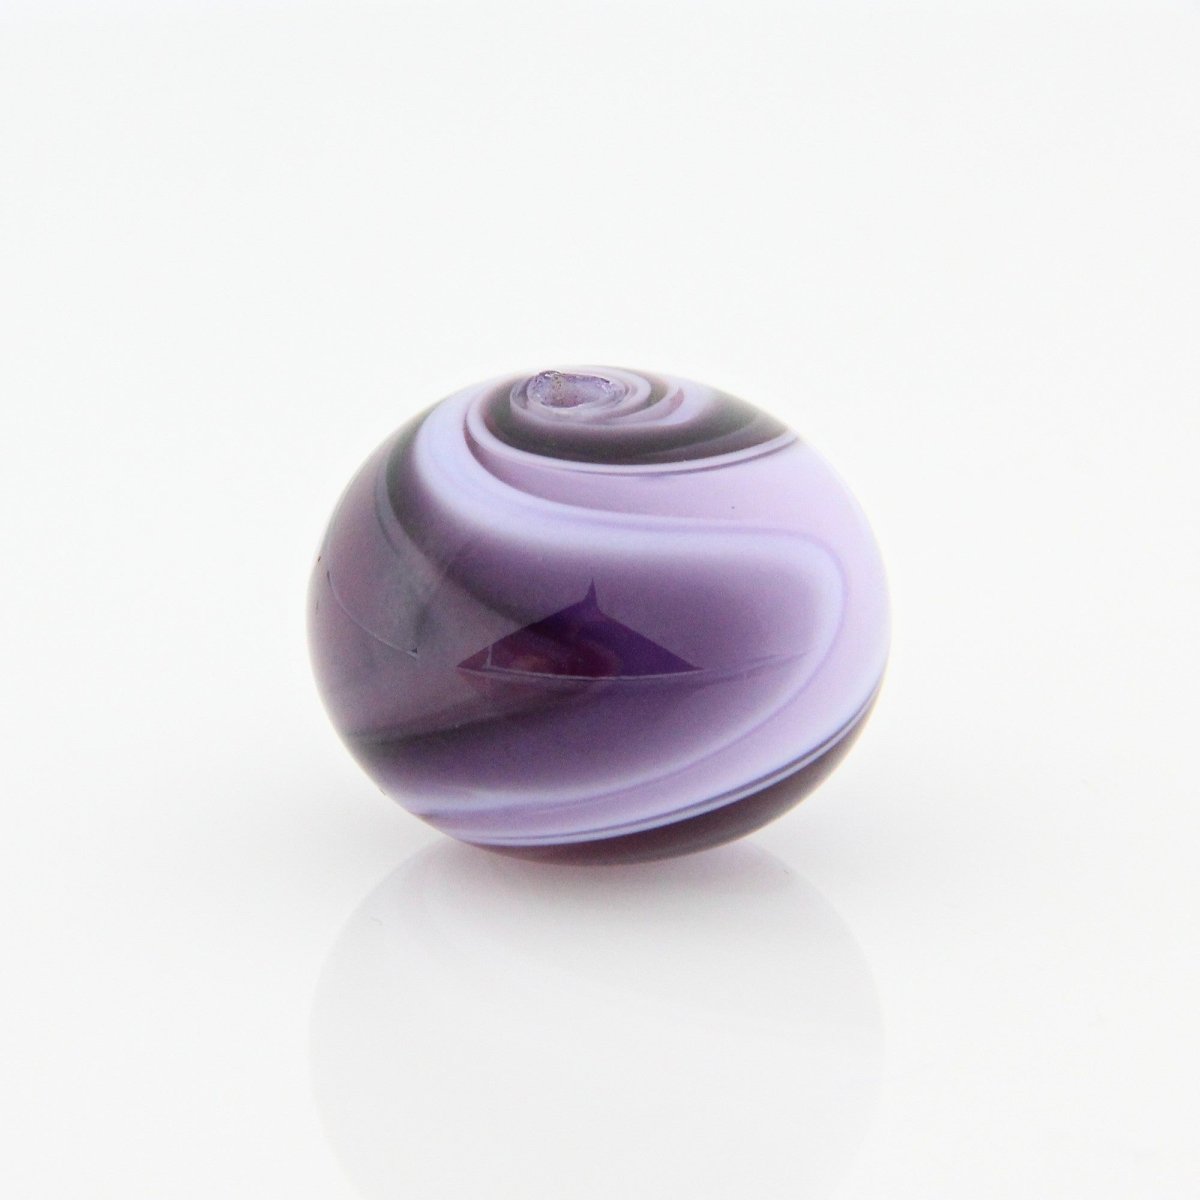 Pink and Purple Striped Statement Bead - Handmade Glass Lampwork, Unique Focal Bead for Pendant, Suncatcher, or Home Decorating